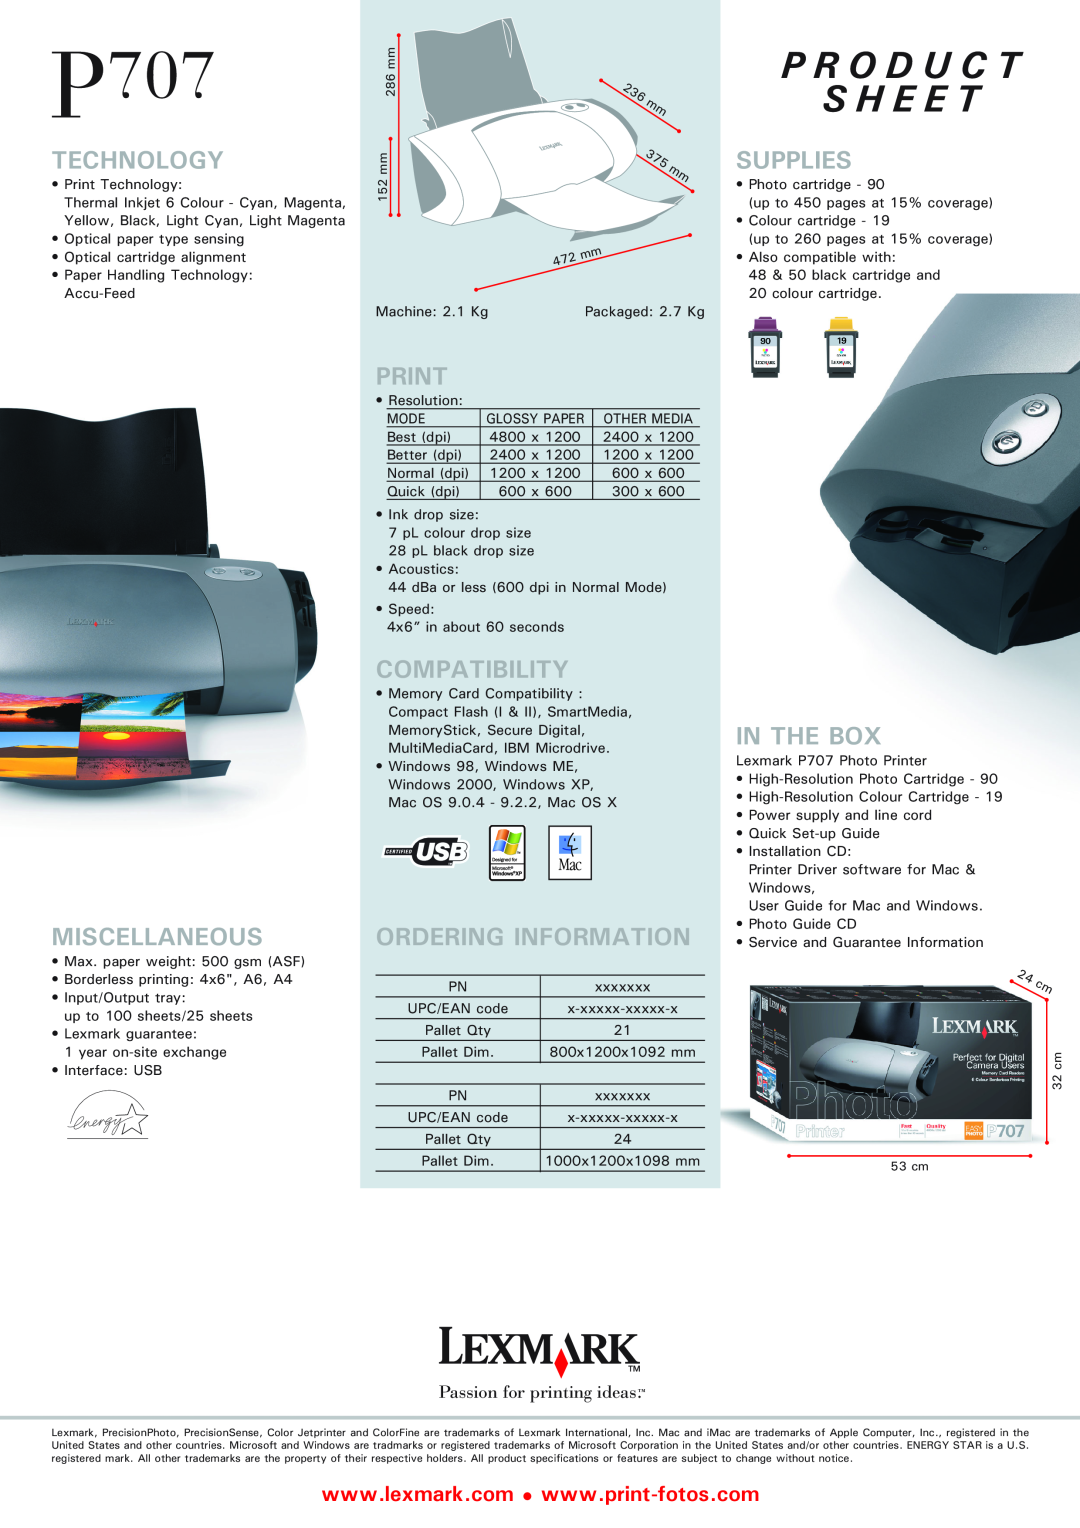 Lexmark P 707 P R O D U C T S H E E T, Technology, Supplies, Miscellaneous, Print, Compatibility, Ordering Information 